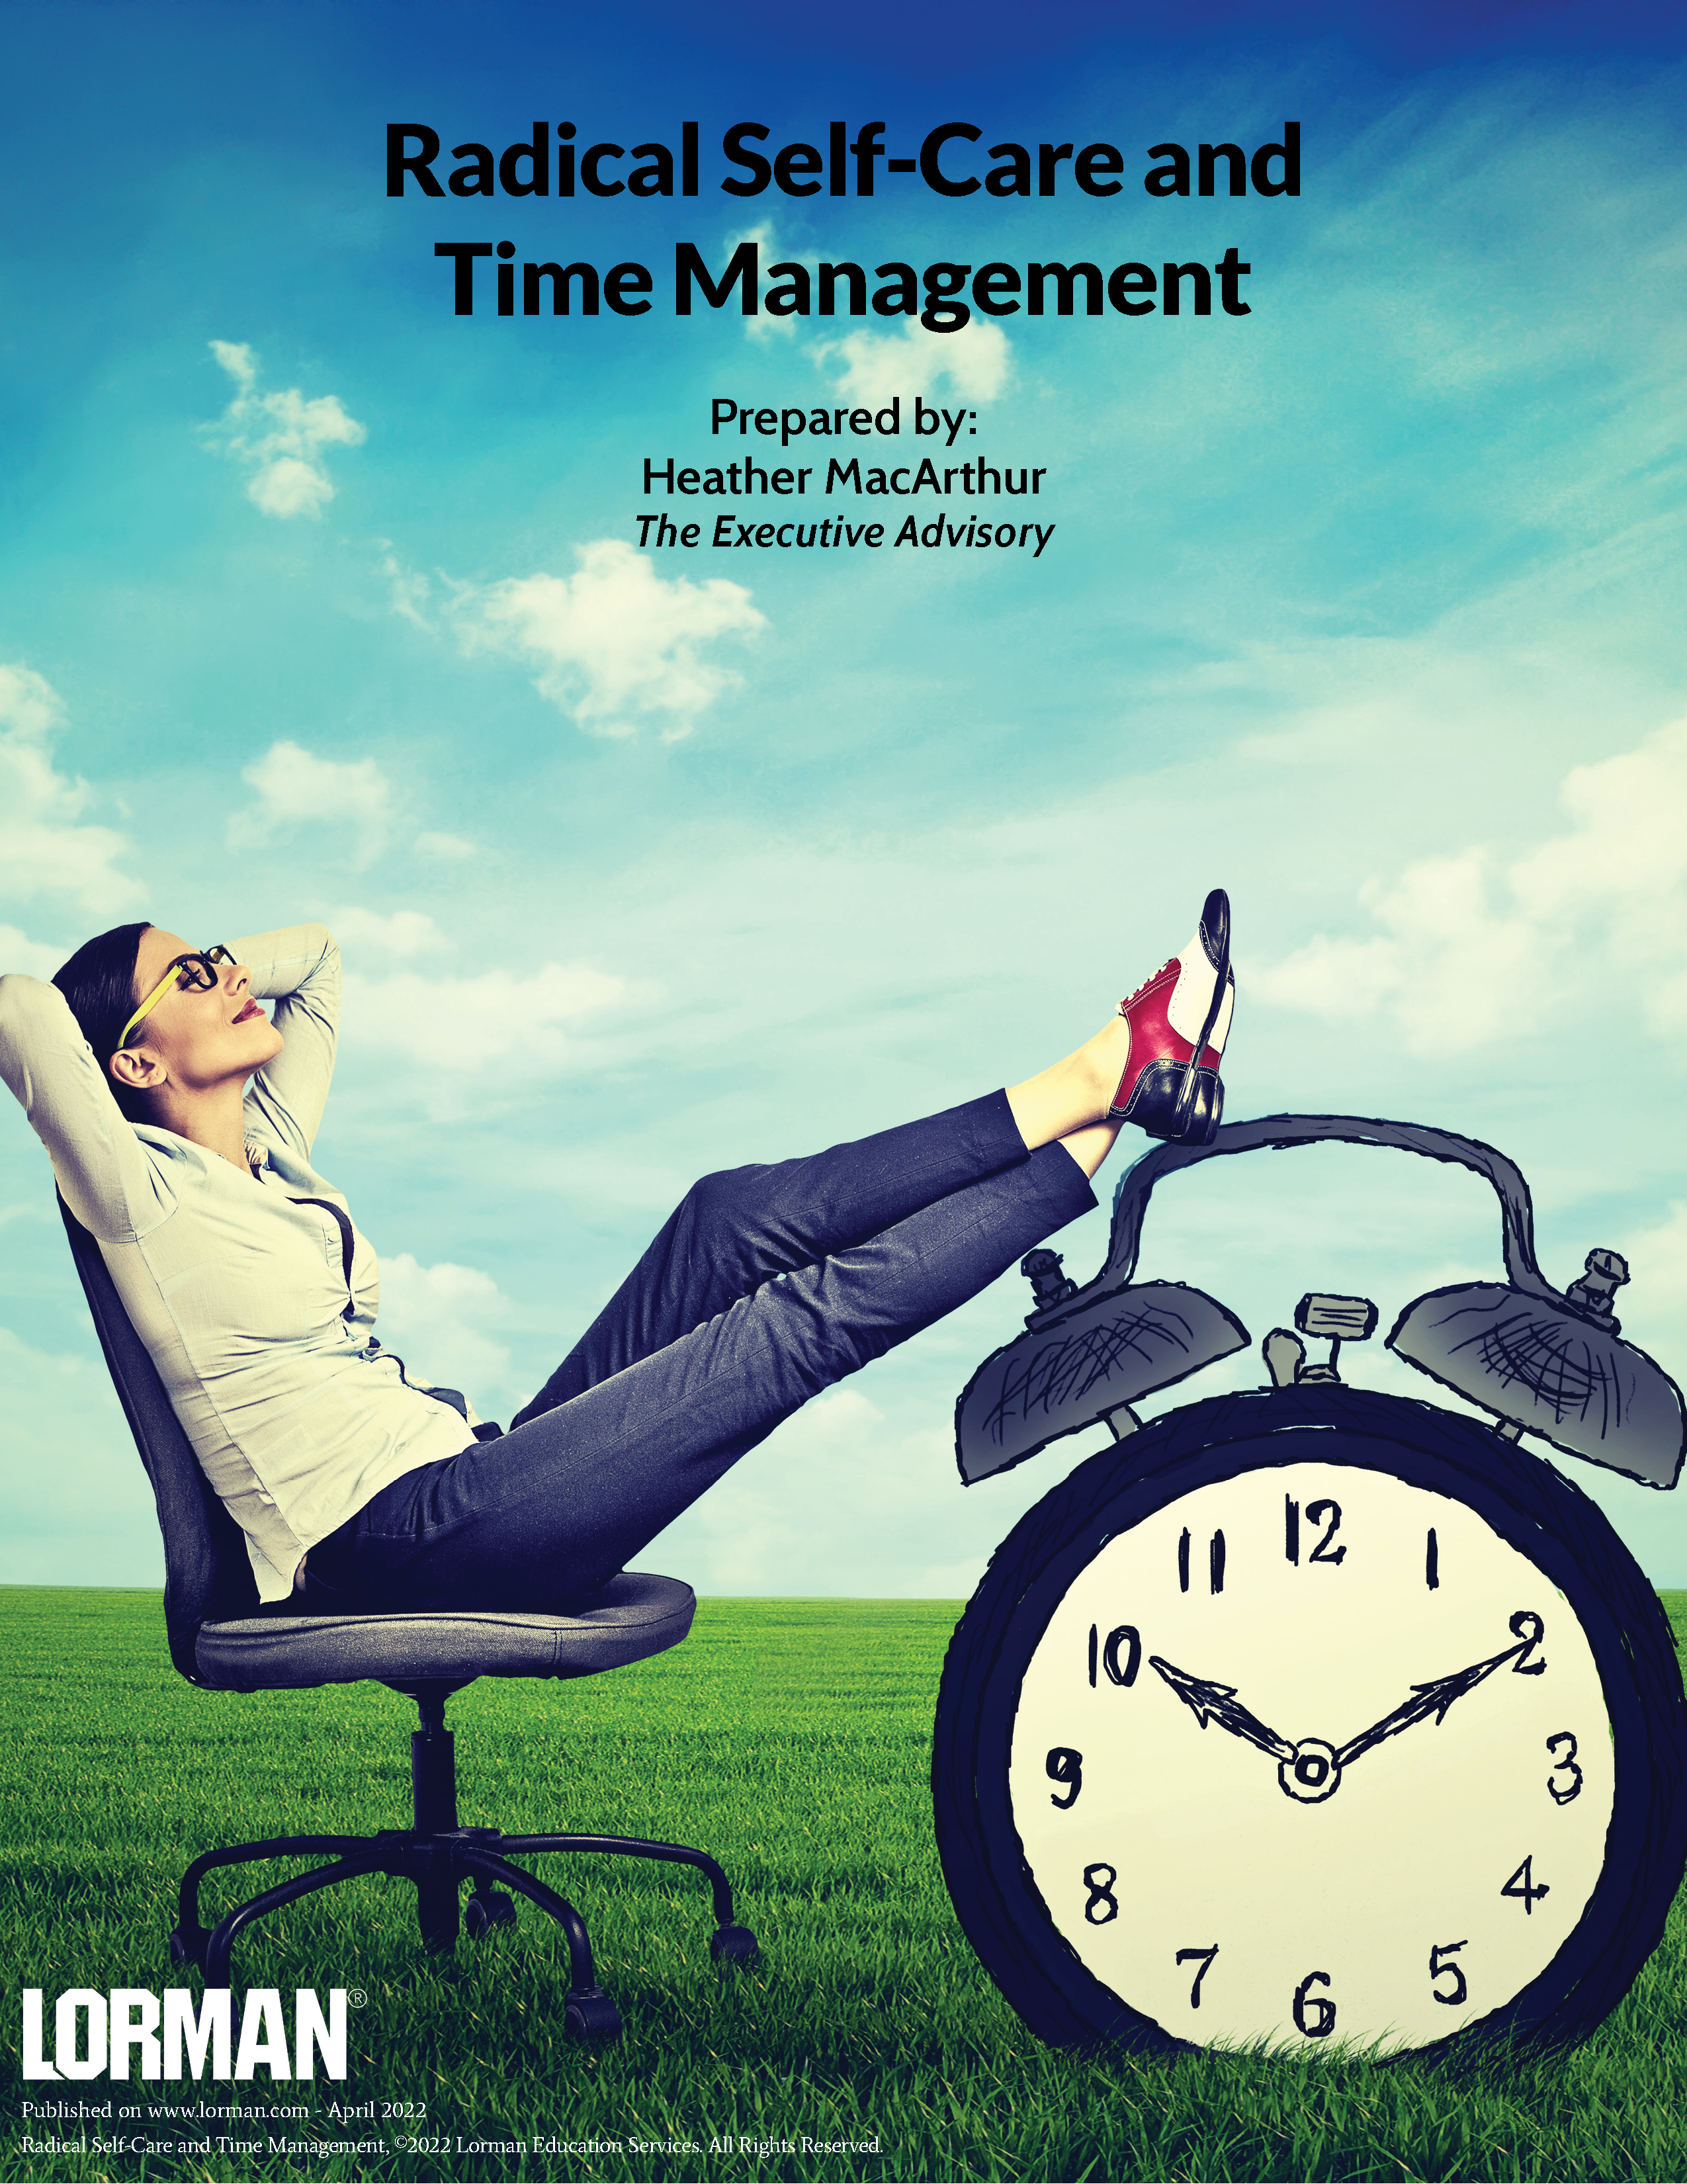 Radical Self-Care and Time Management